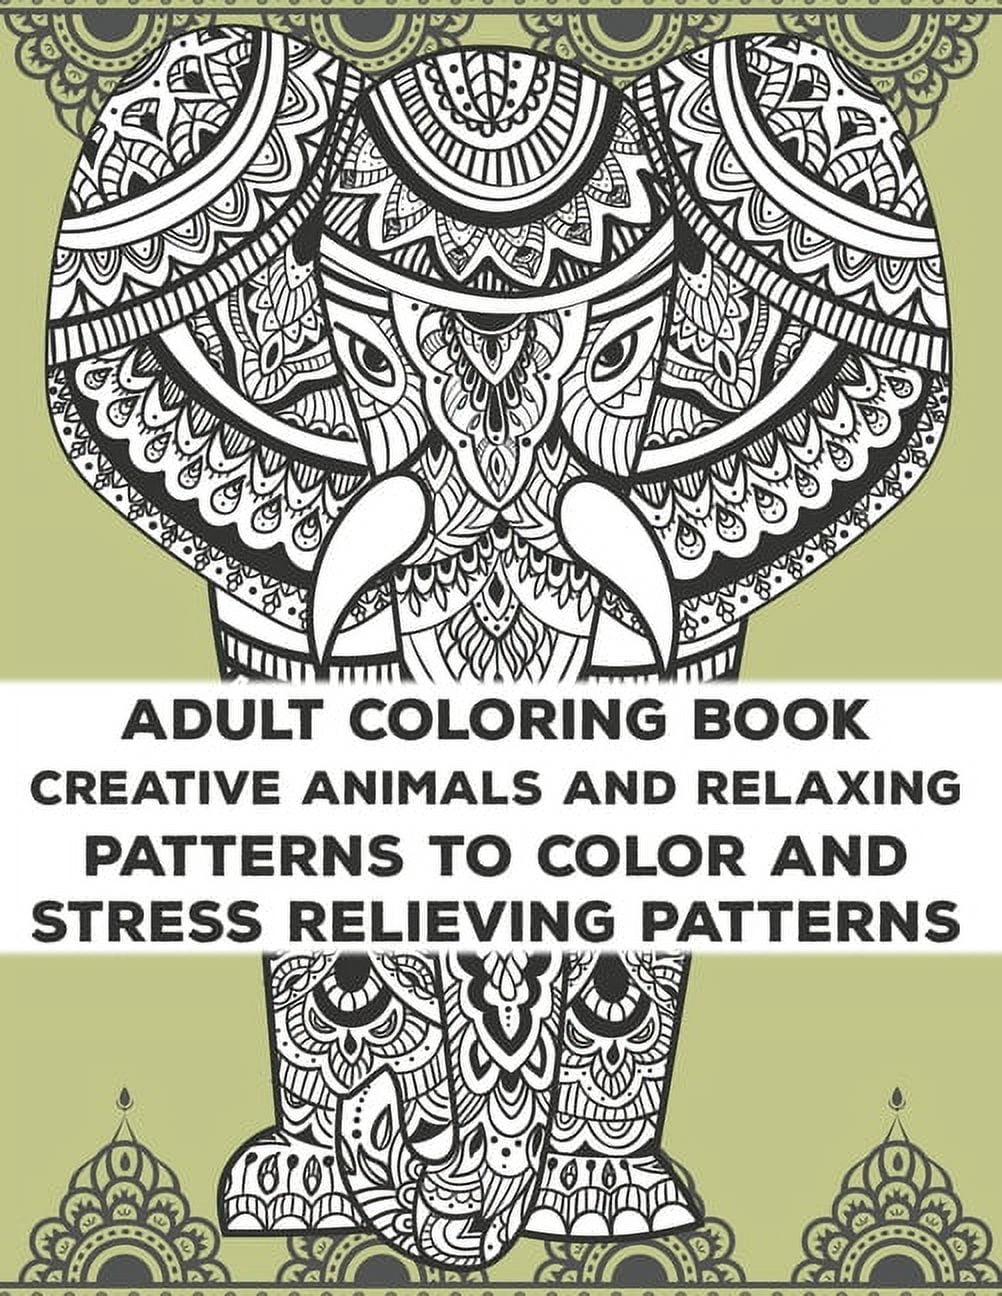 Abstract Coloring Books for Adults: Abstract Coloring Books For Adults Relaxation For Women Or Men In Large Print, Relaxation and Creativity Stimulation for Grown-Ups [Book]